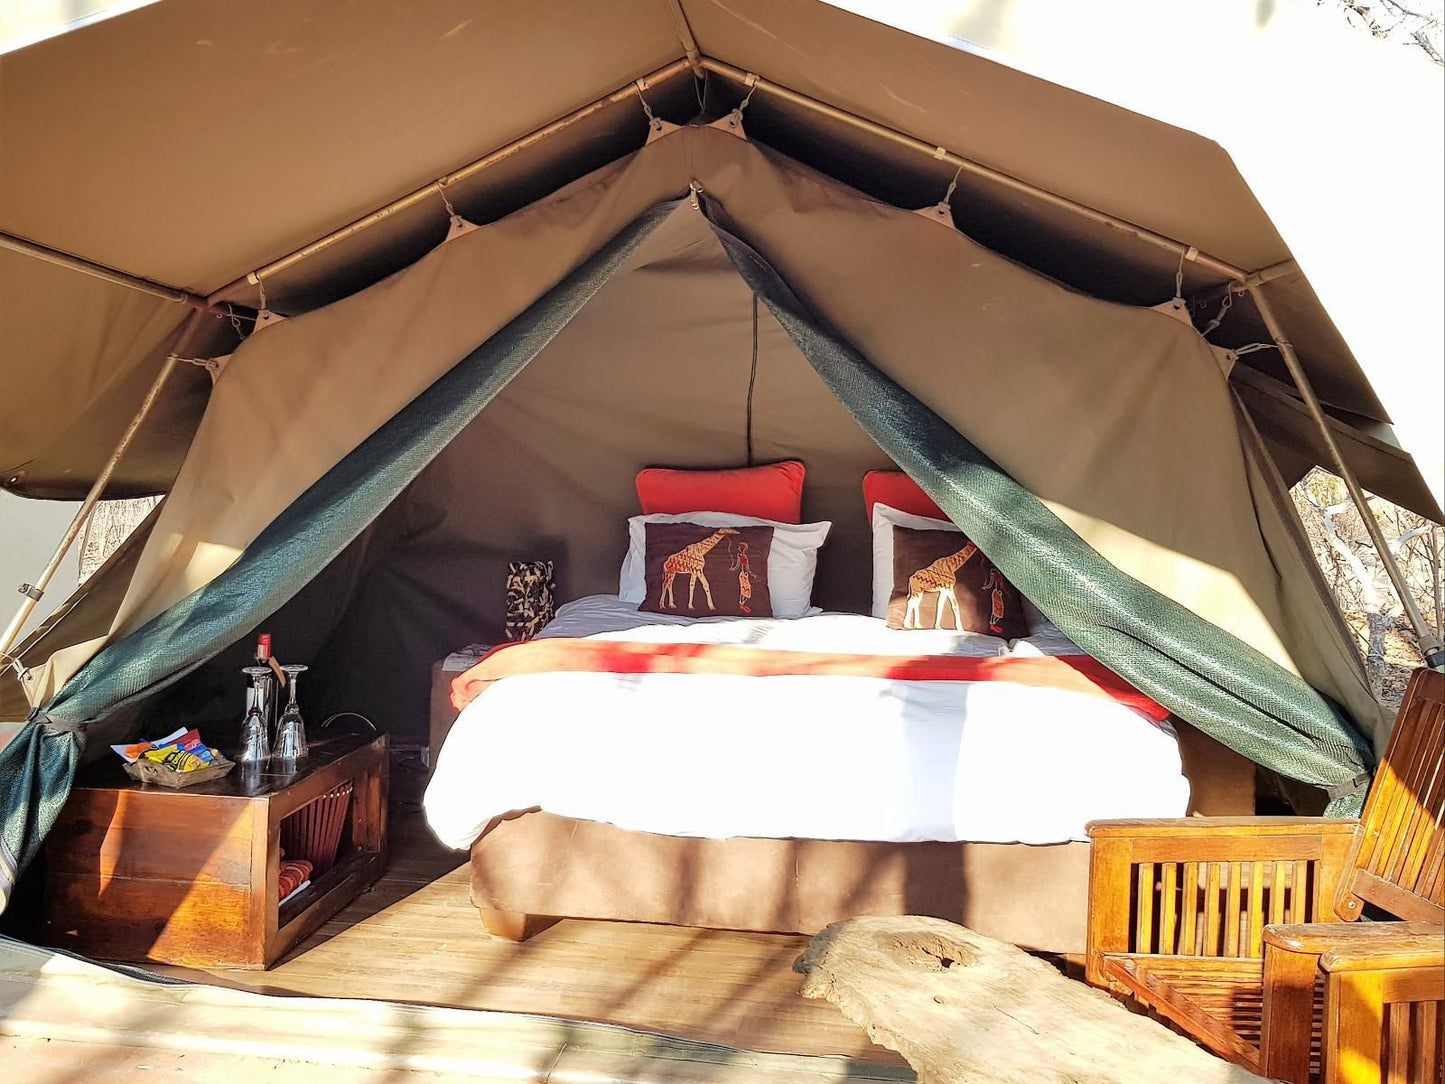 Ama Amanzi Bush Lodge Vaalwater Limpopo Province South Africa Tent, Architecture, Bedroom